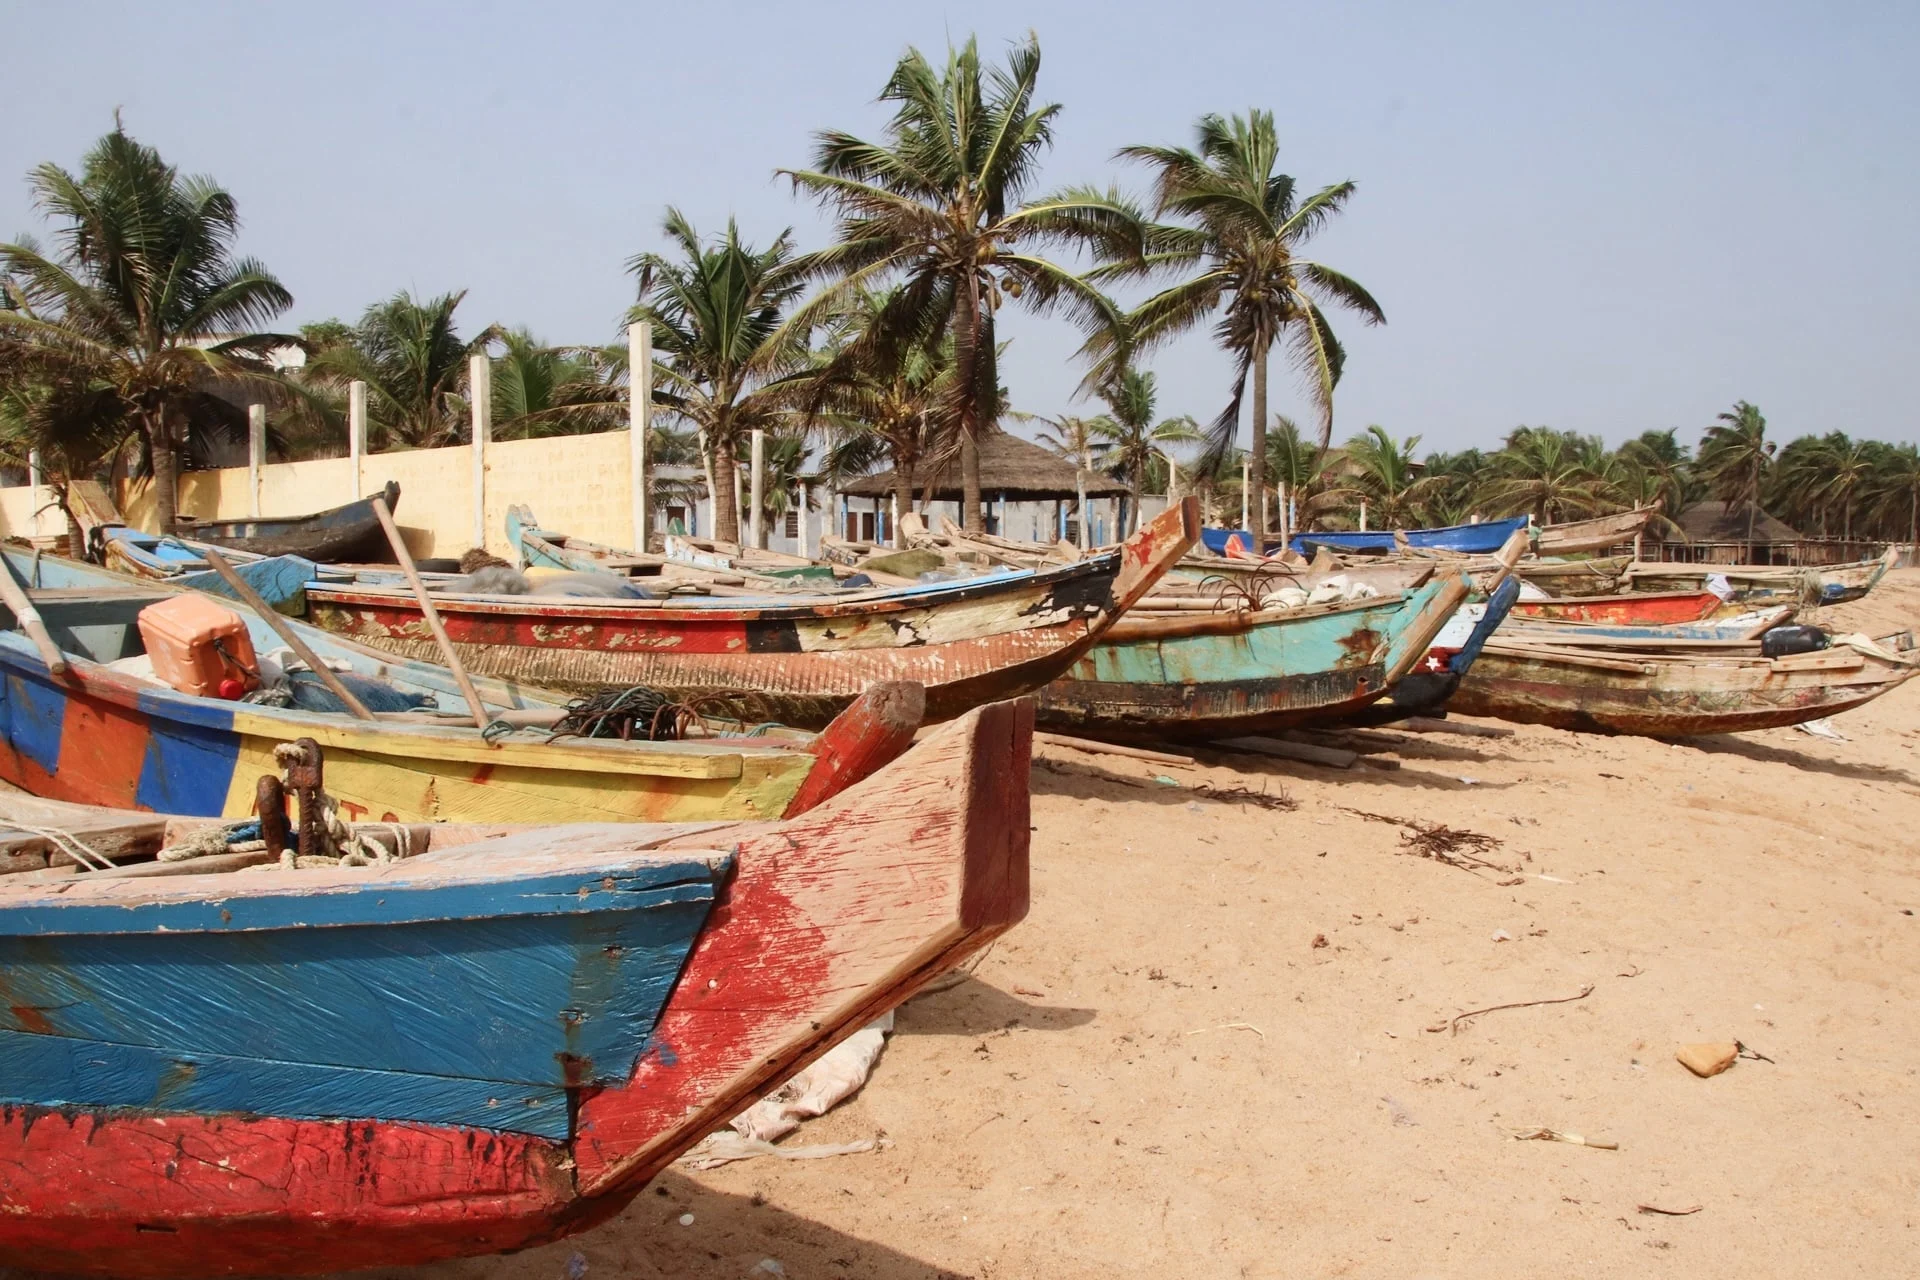 A group of colorful fishing boats on a sandy beach.